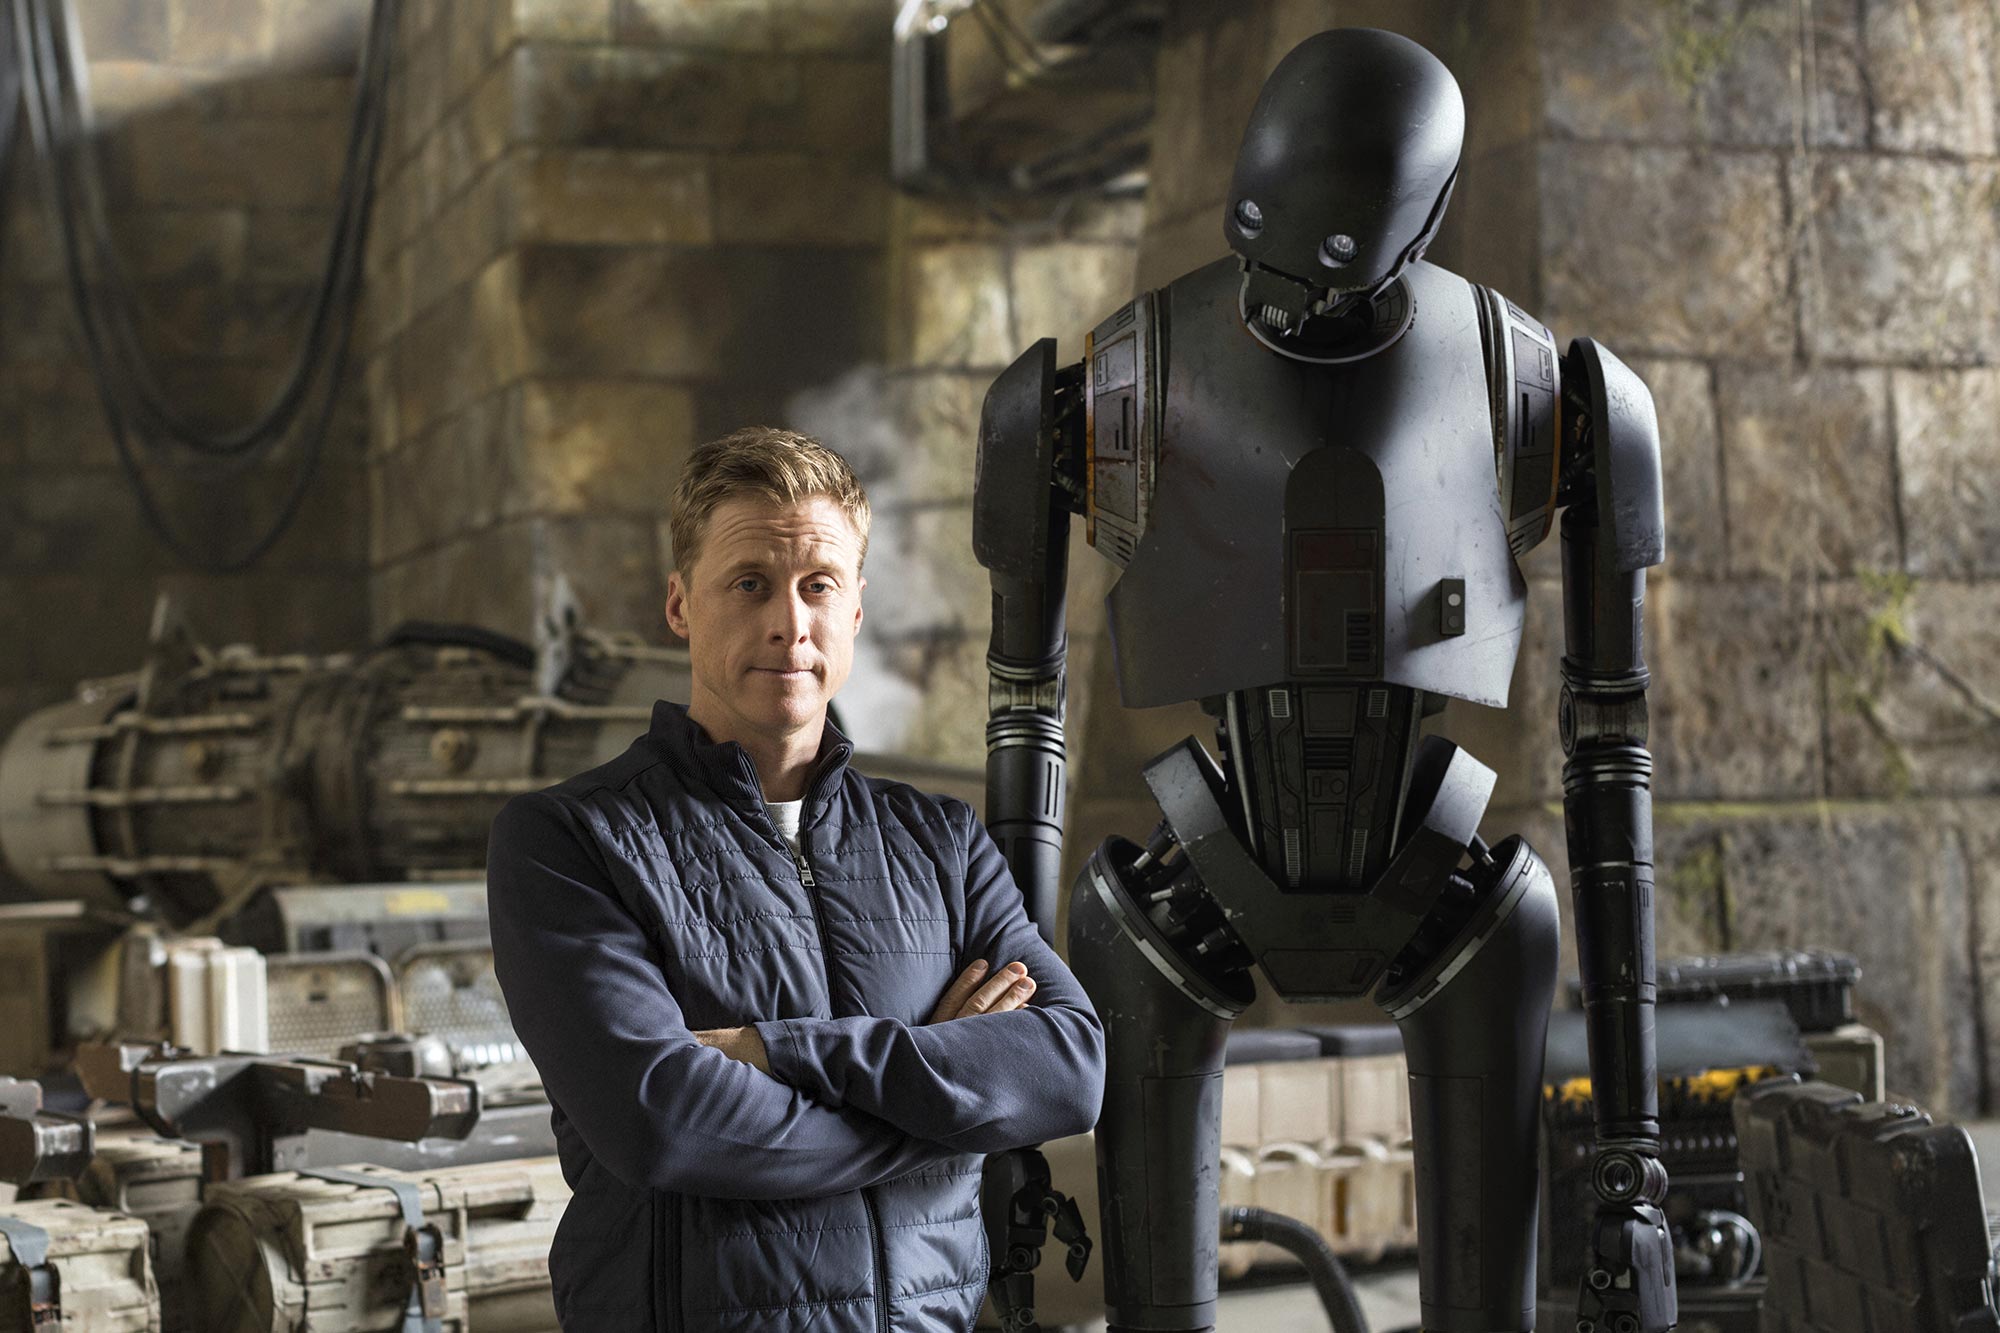 Rogue One: A Star Wars Story (2016) Droids - actor Alan Tudyk who plays K-2S0